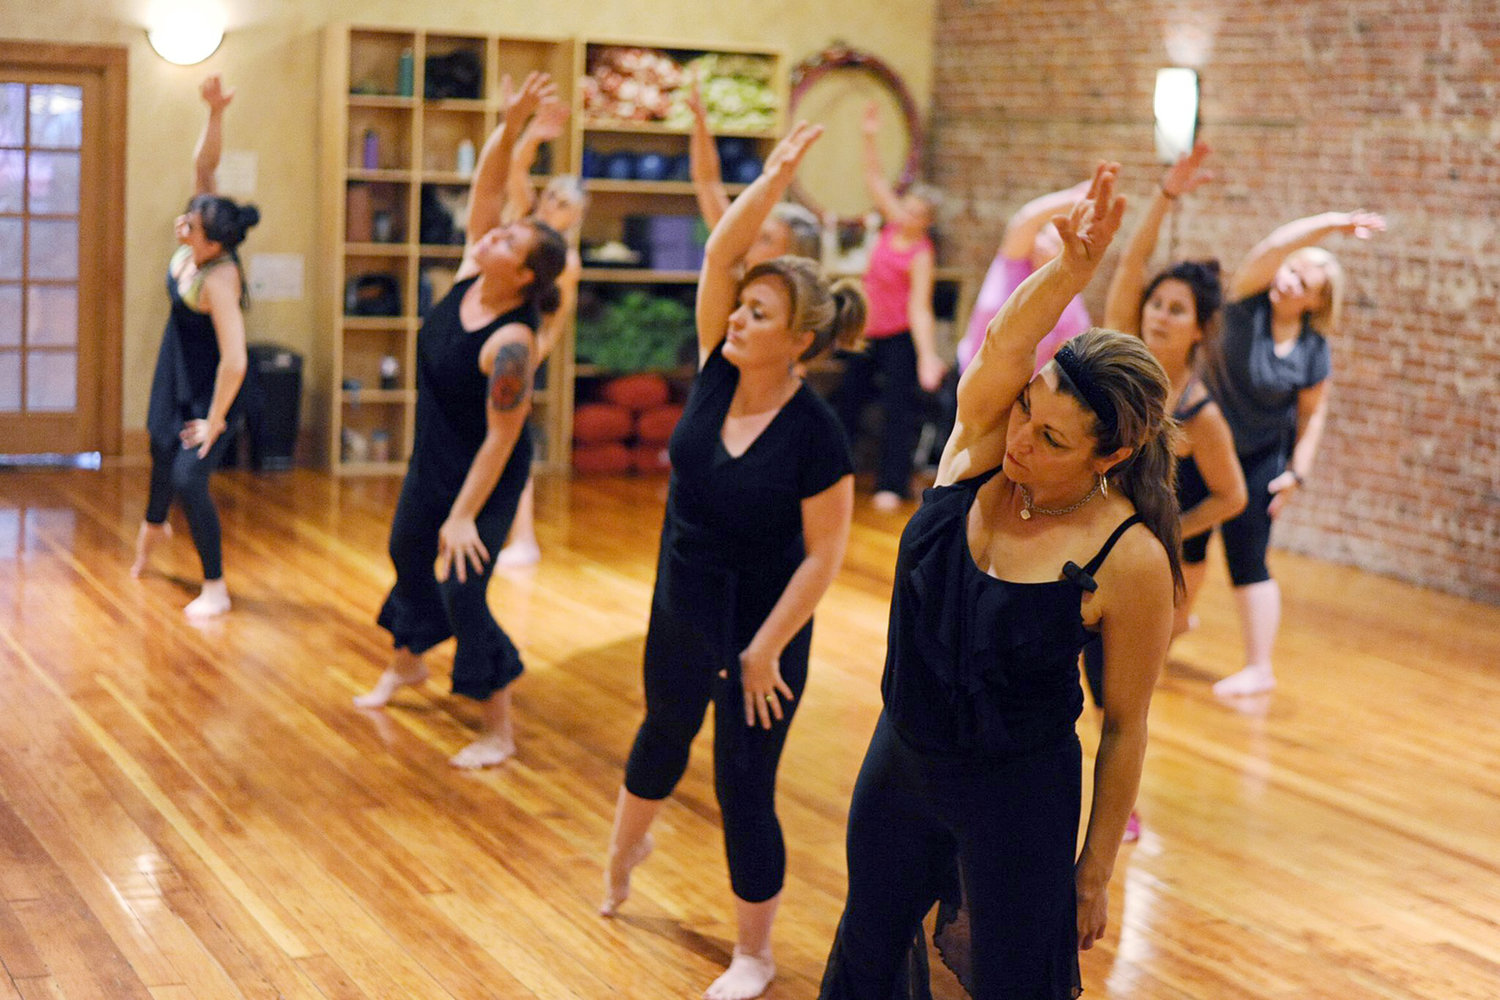 Nia class in action at Embody Movement Studio and Boutique in Centralia.